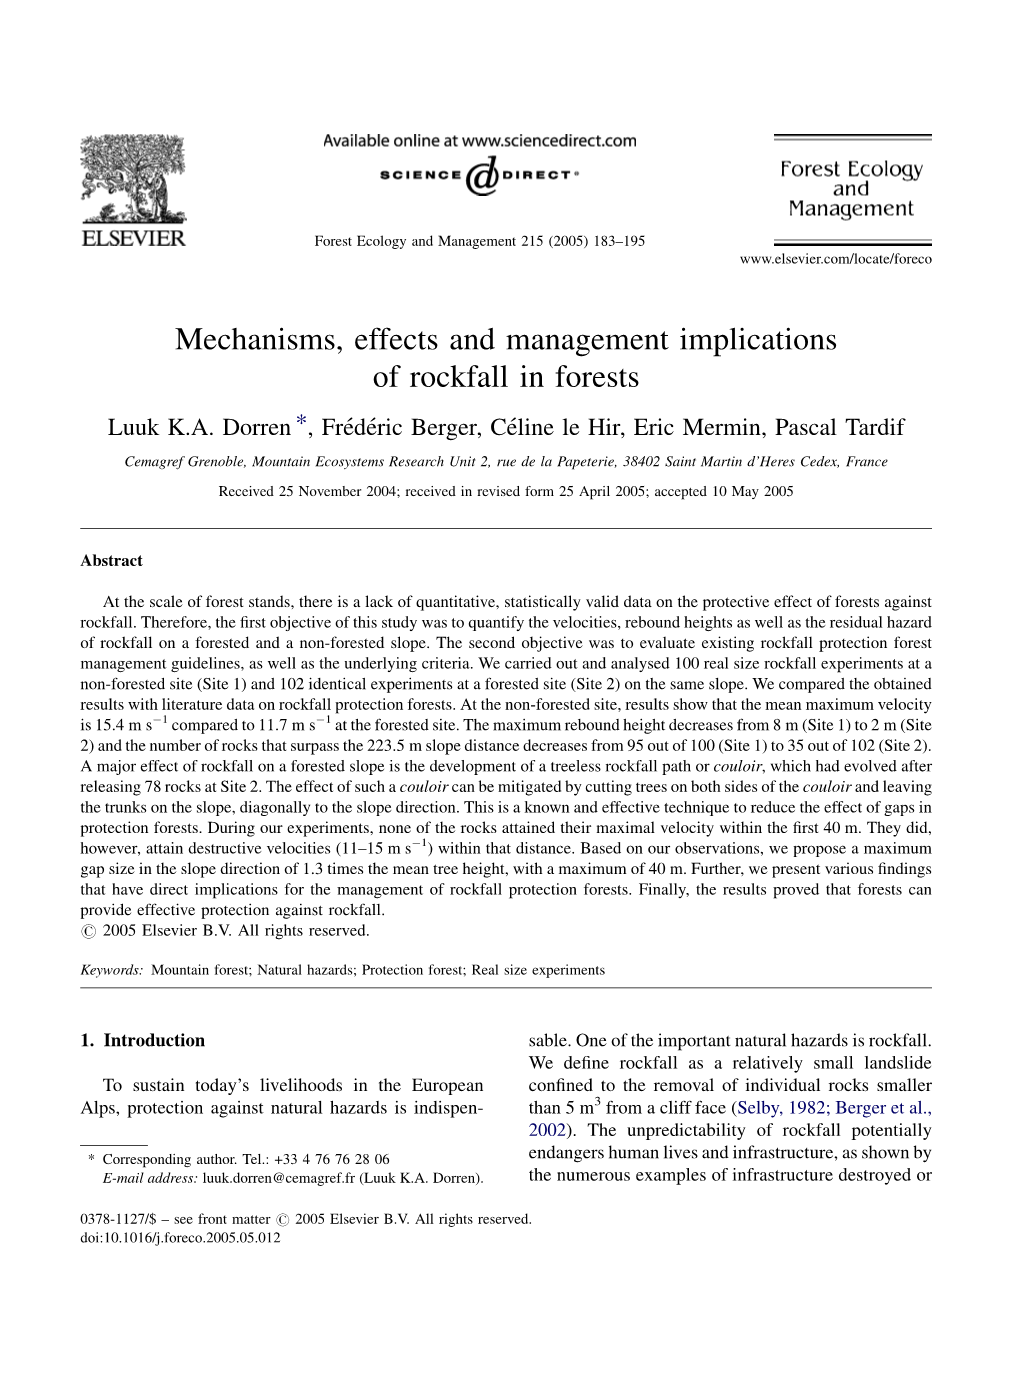 Mechanisms, Effects and Management Implications of Rockfall in Forests Luuk K.A